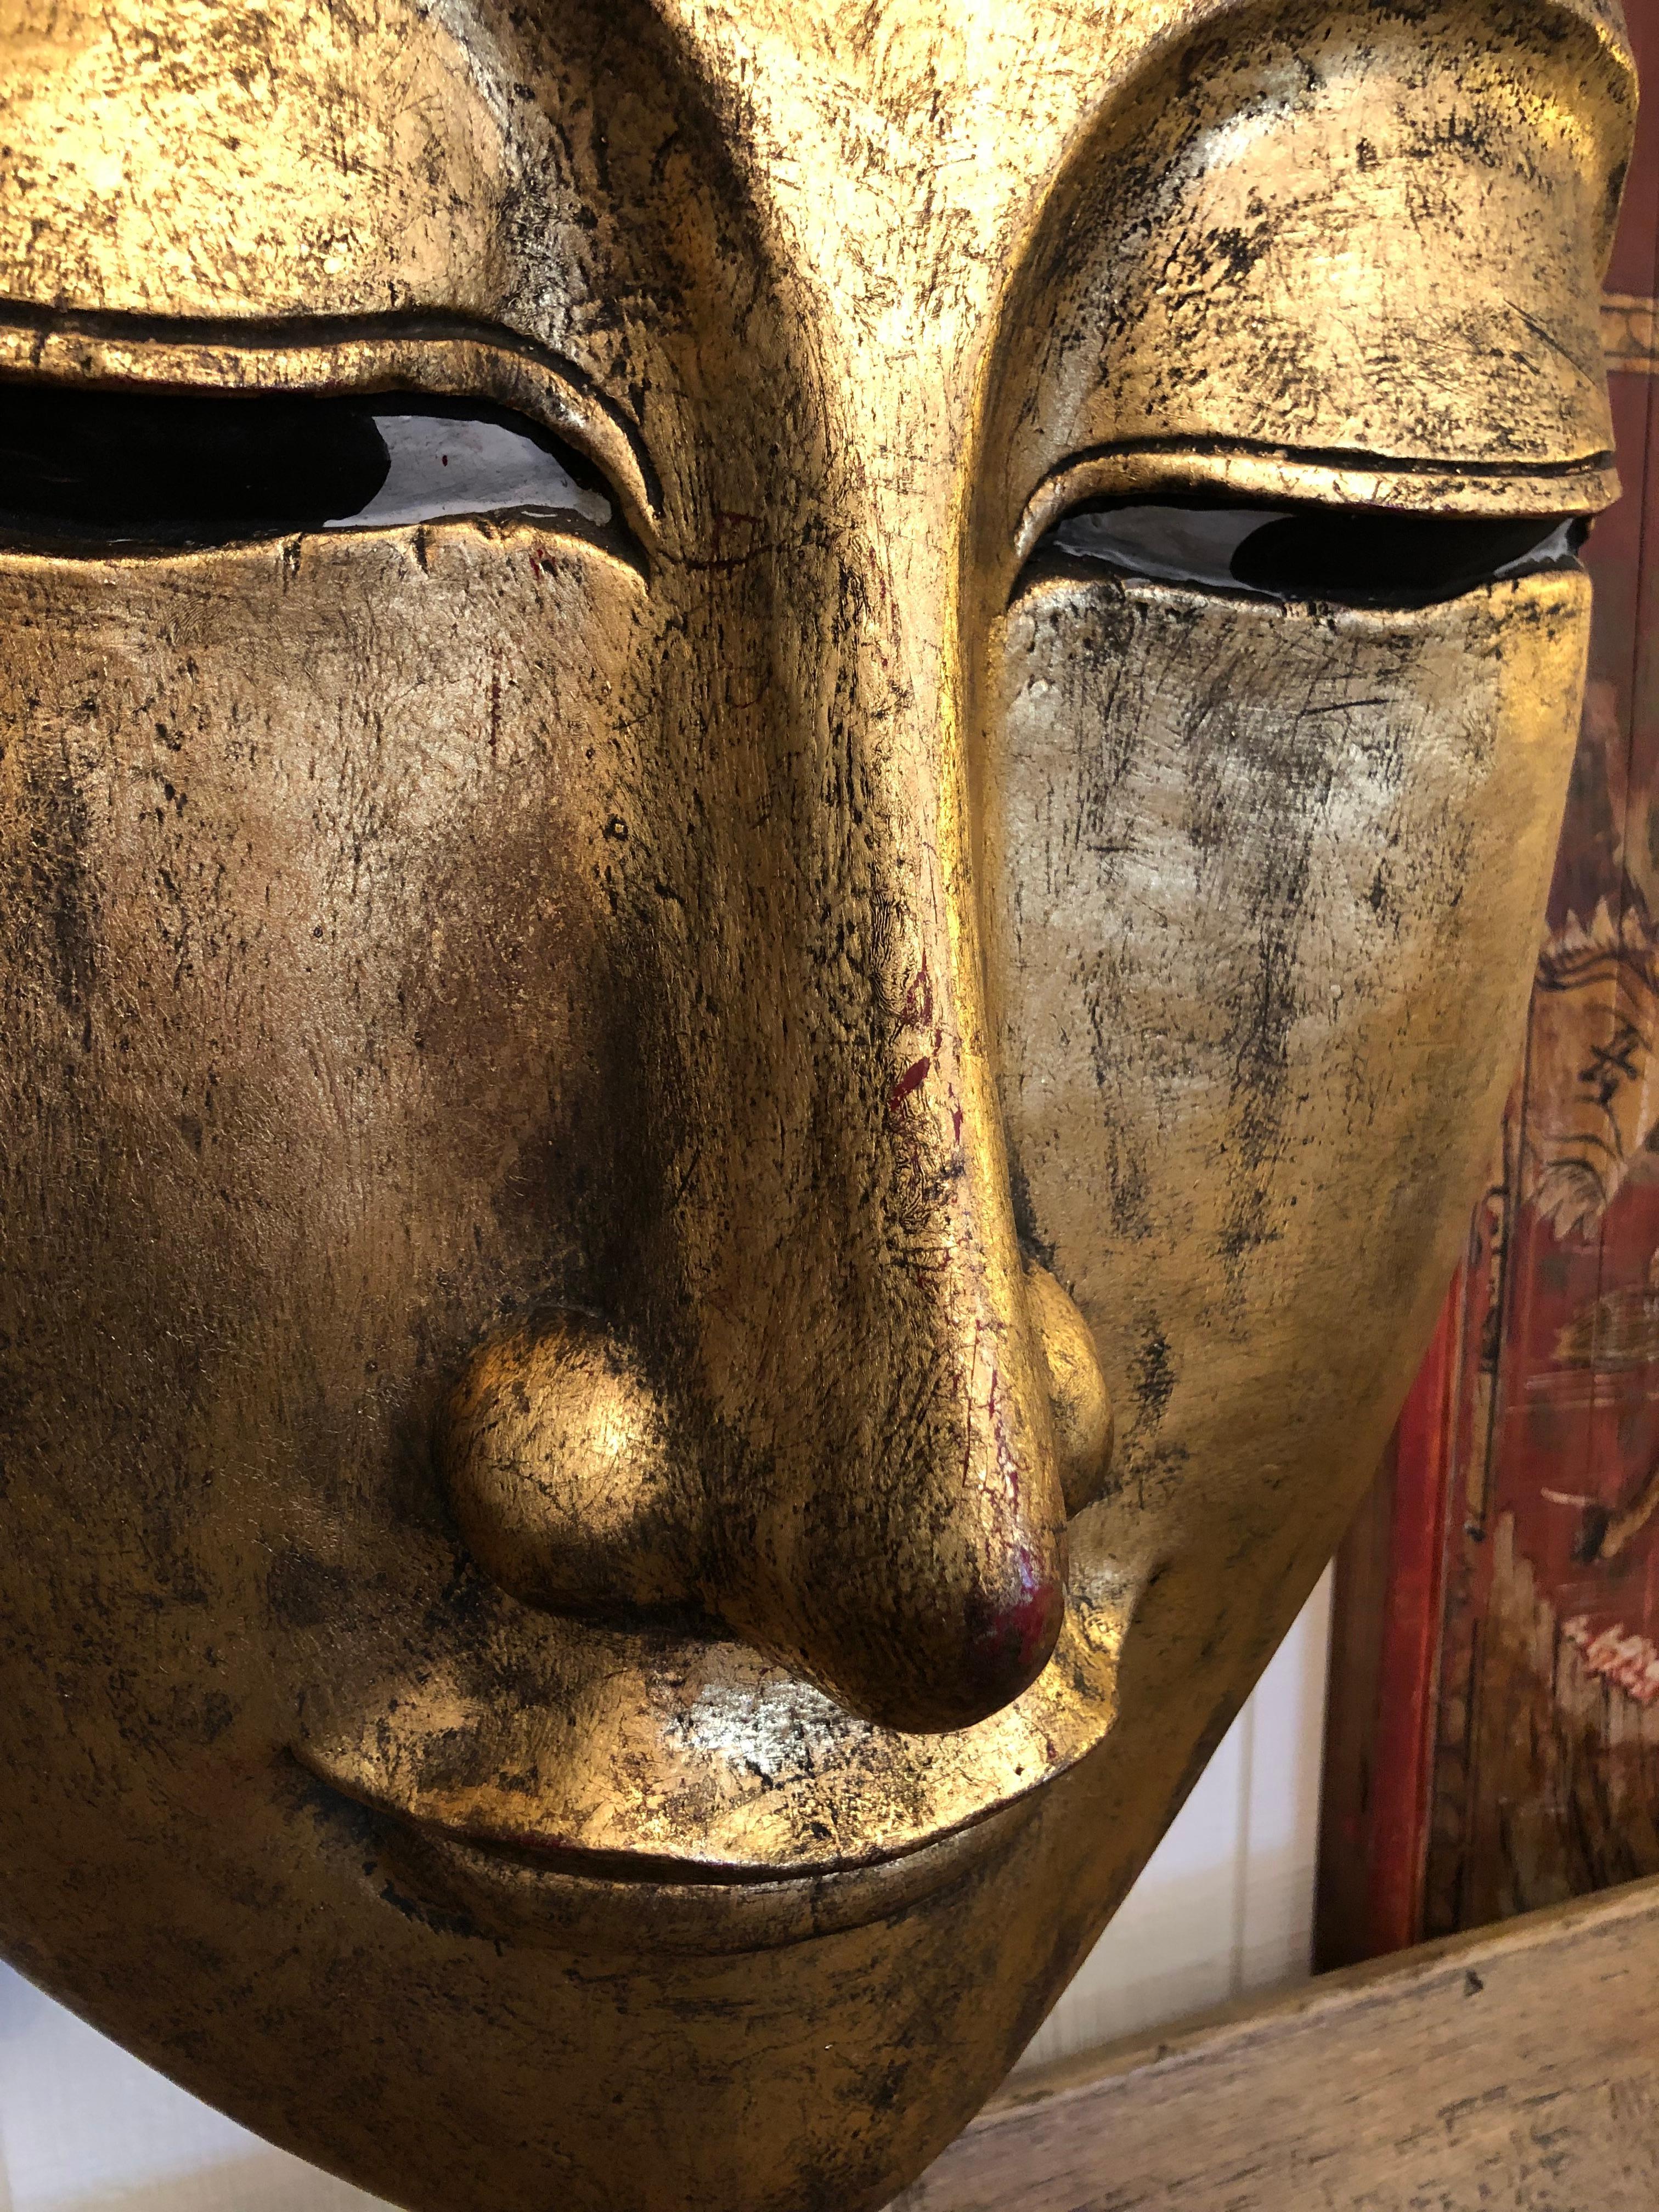 Sensational eye poppingly glamorous and huge gilded carved wood head of a Buddha that hangs as wall art.  Incredibly detailed with serene facial expression, hundreds of circular raised embellishments around the crown, and inlaid bits and pieces of